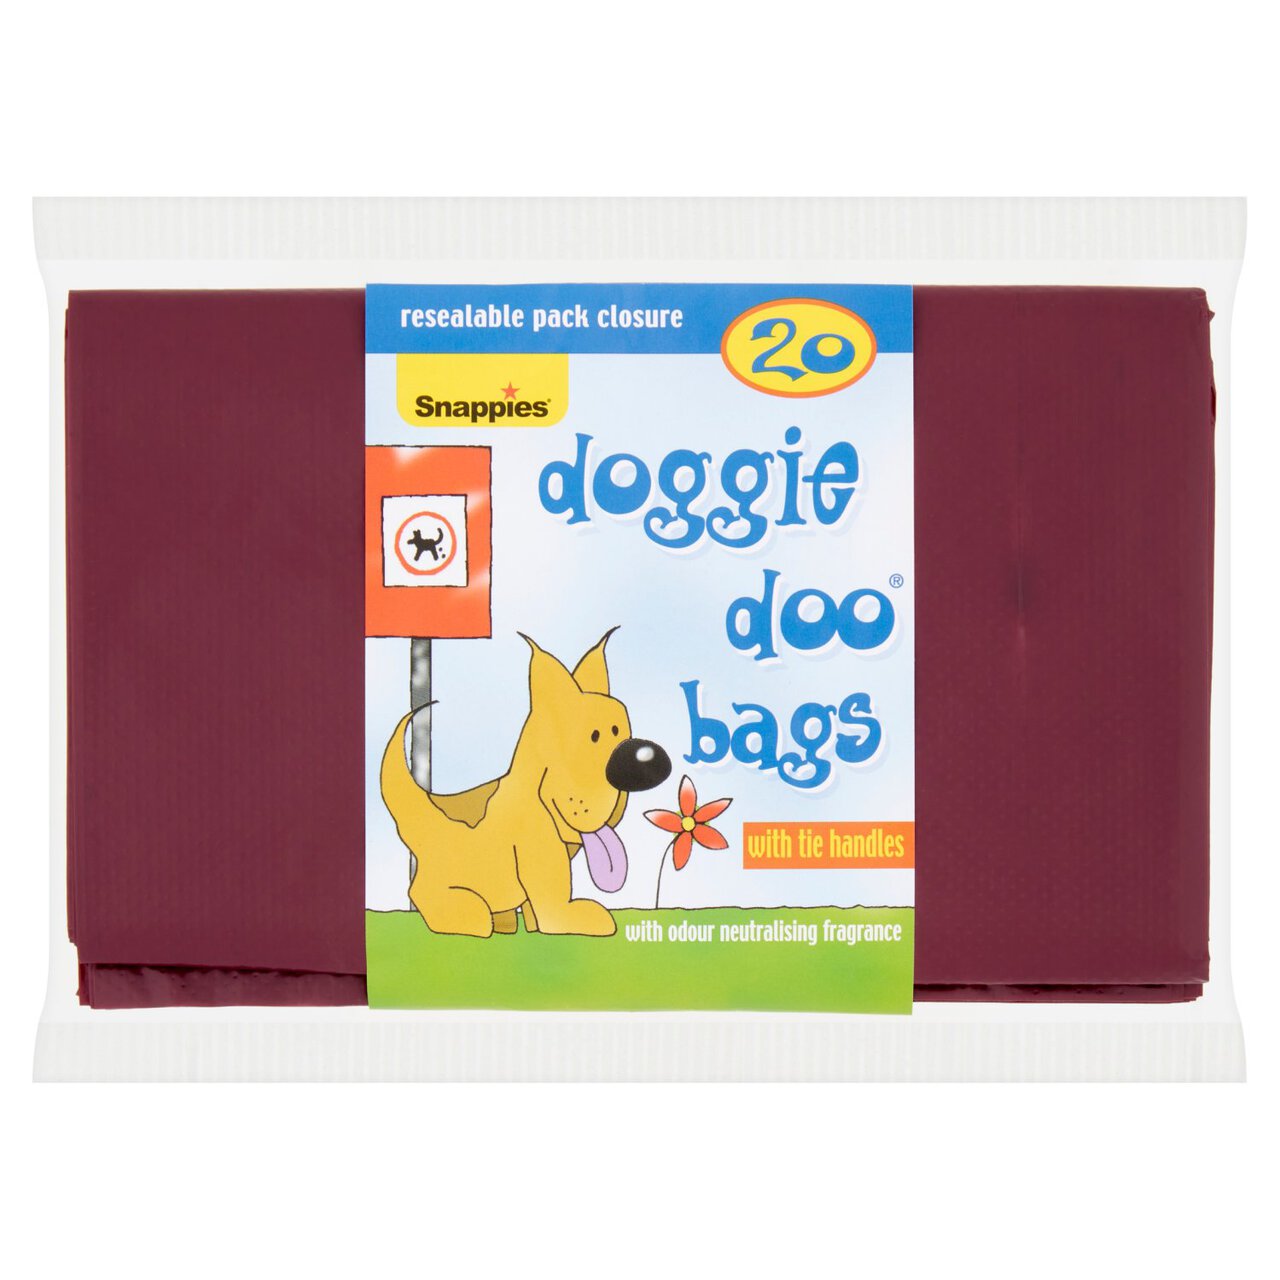 Snappies Tidy-Up Doggie Doo Bags with Tie Handles 20 per pack